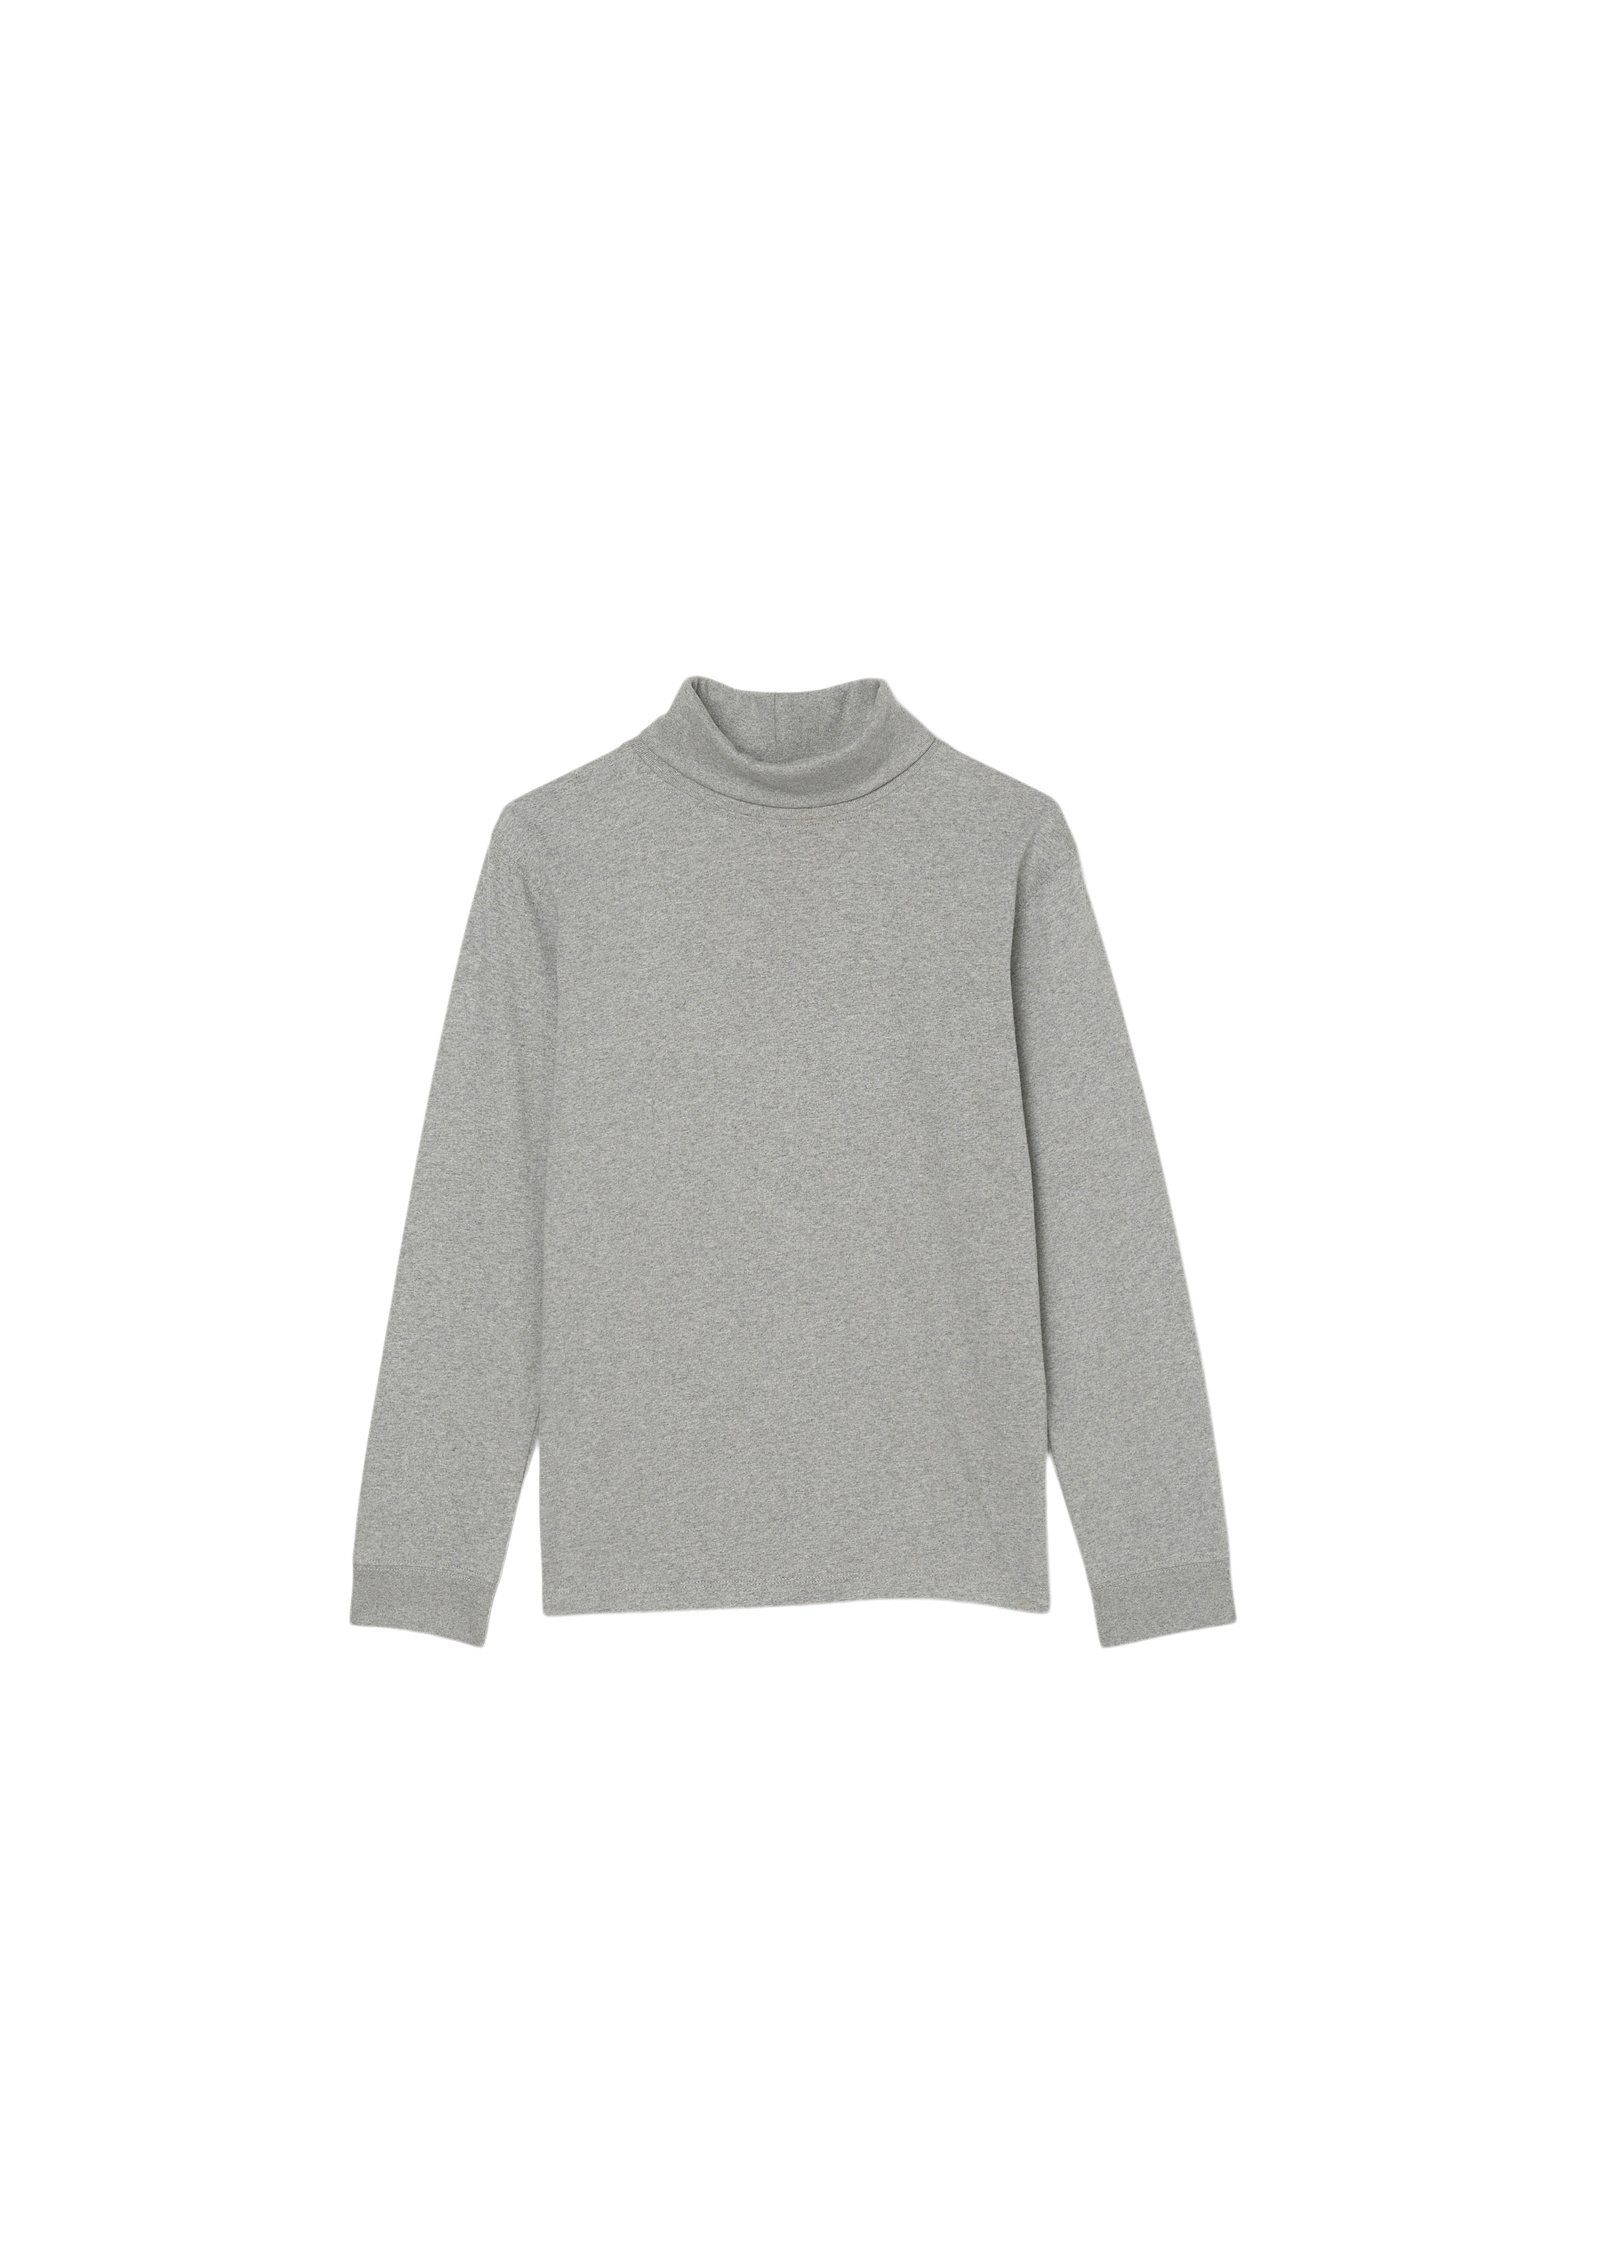 Marc O'Polo Jersey-Qualität softer Strickpullover grau in